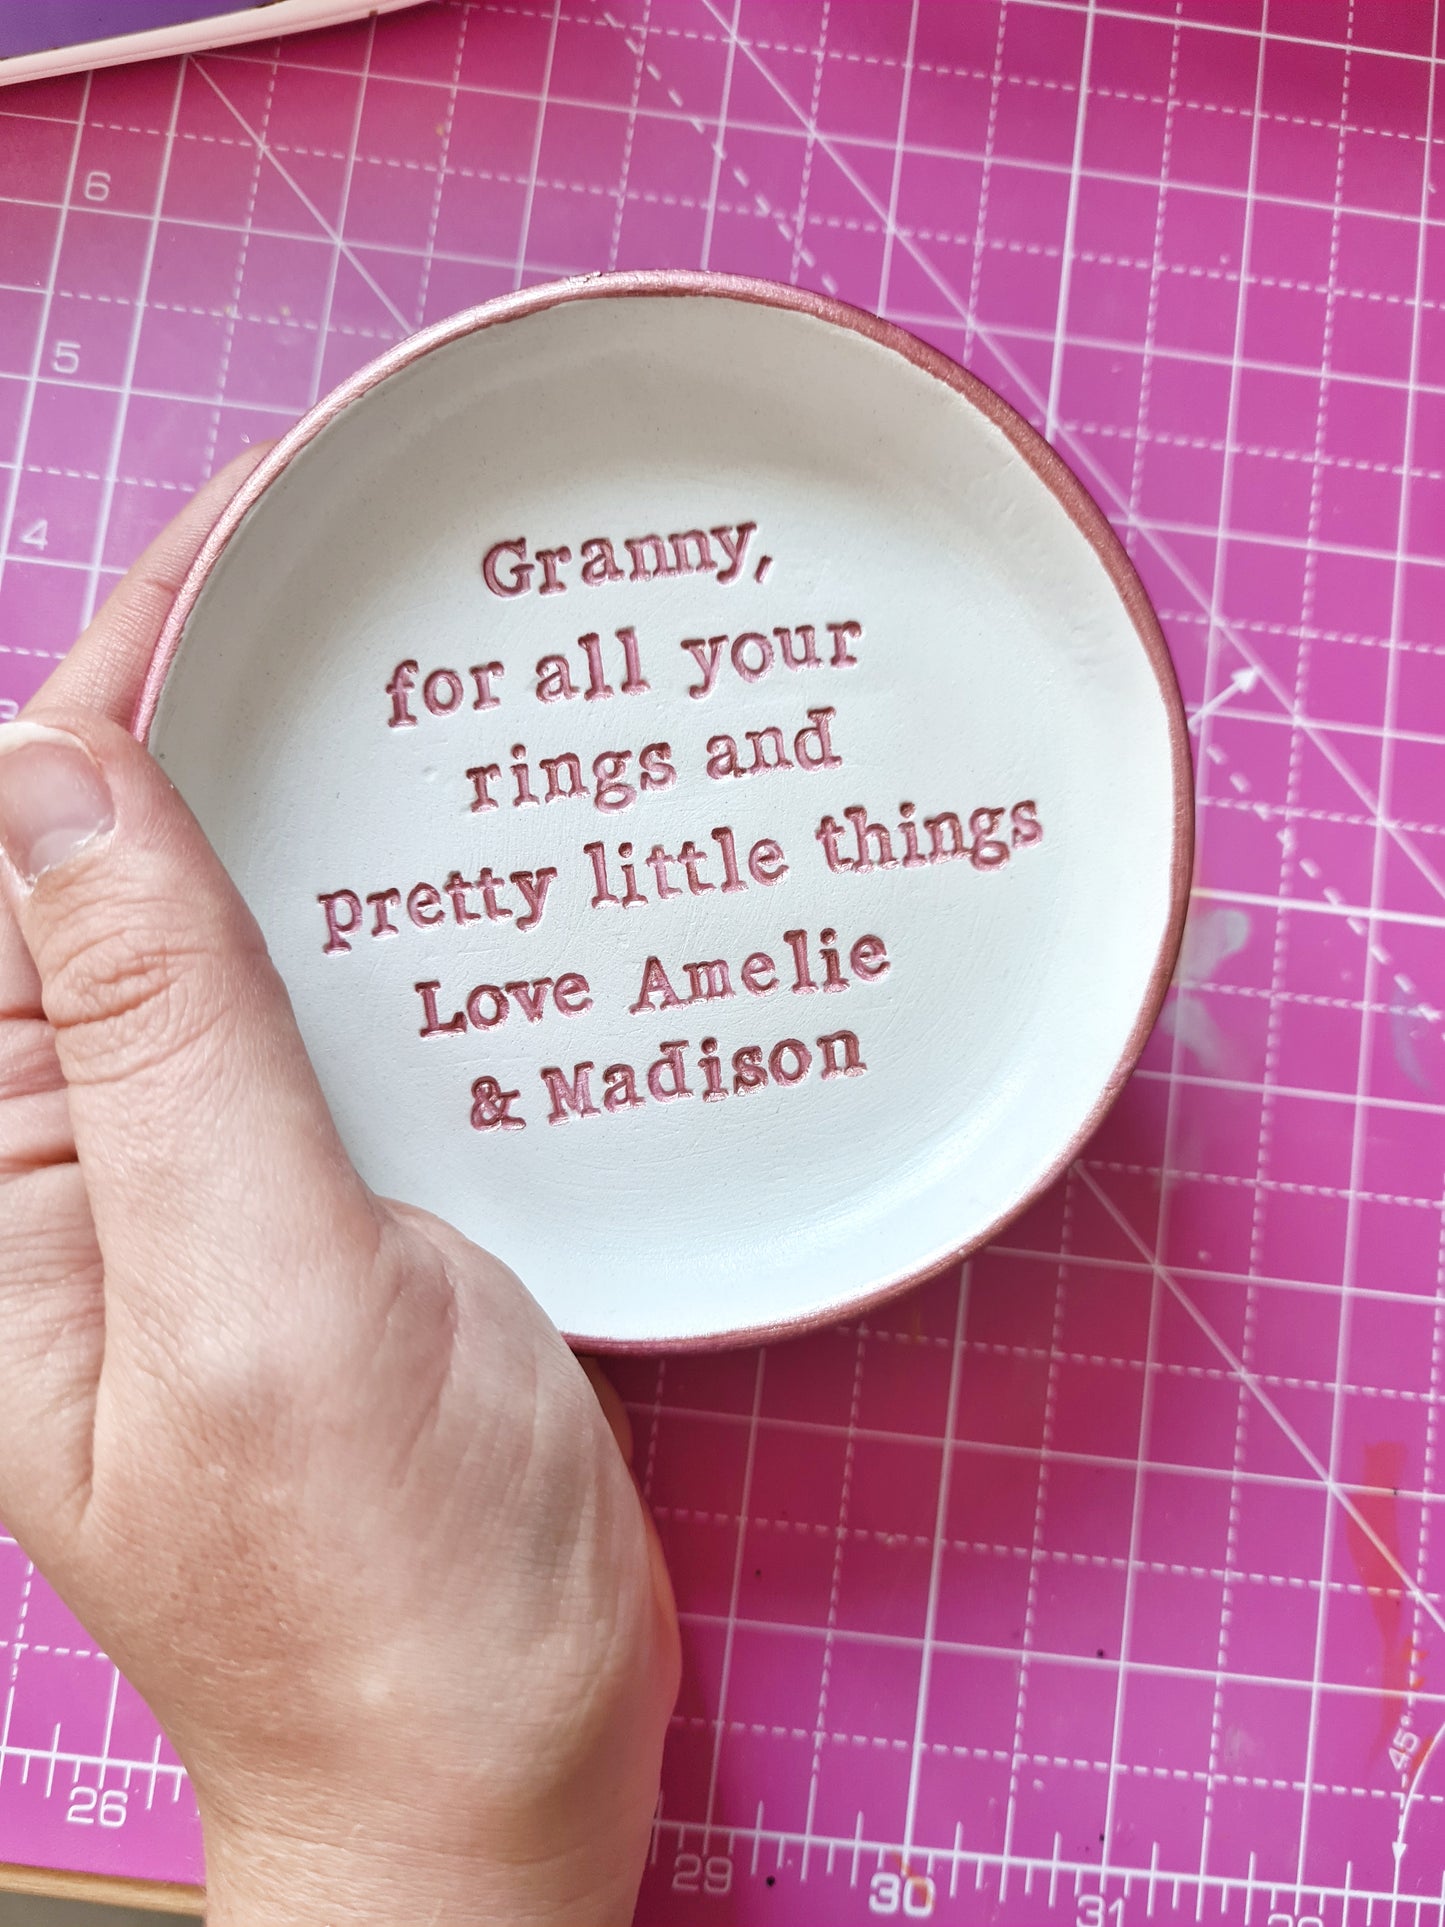 For all your rings... ring dish